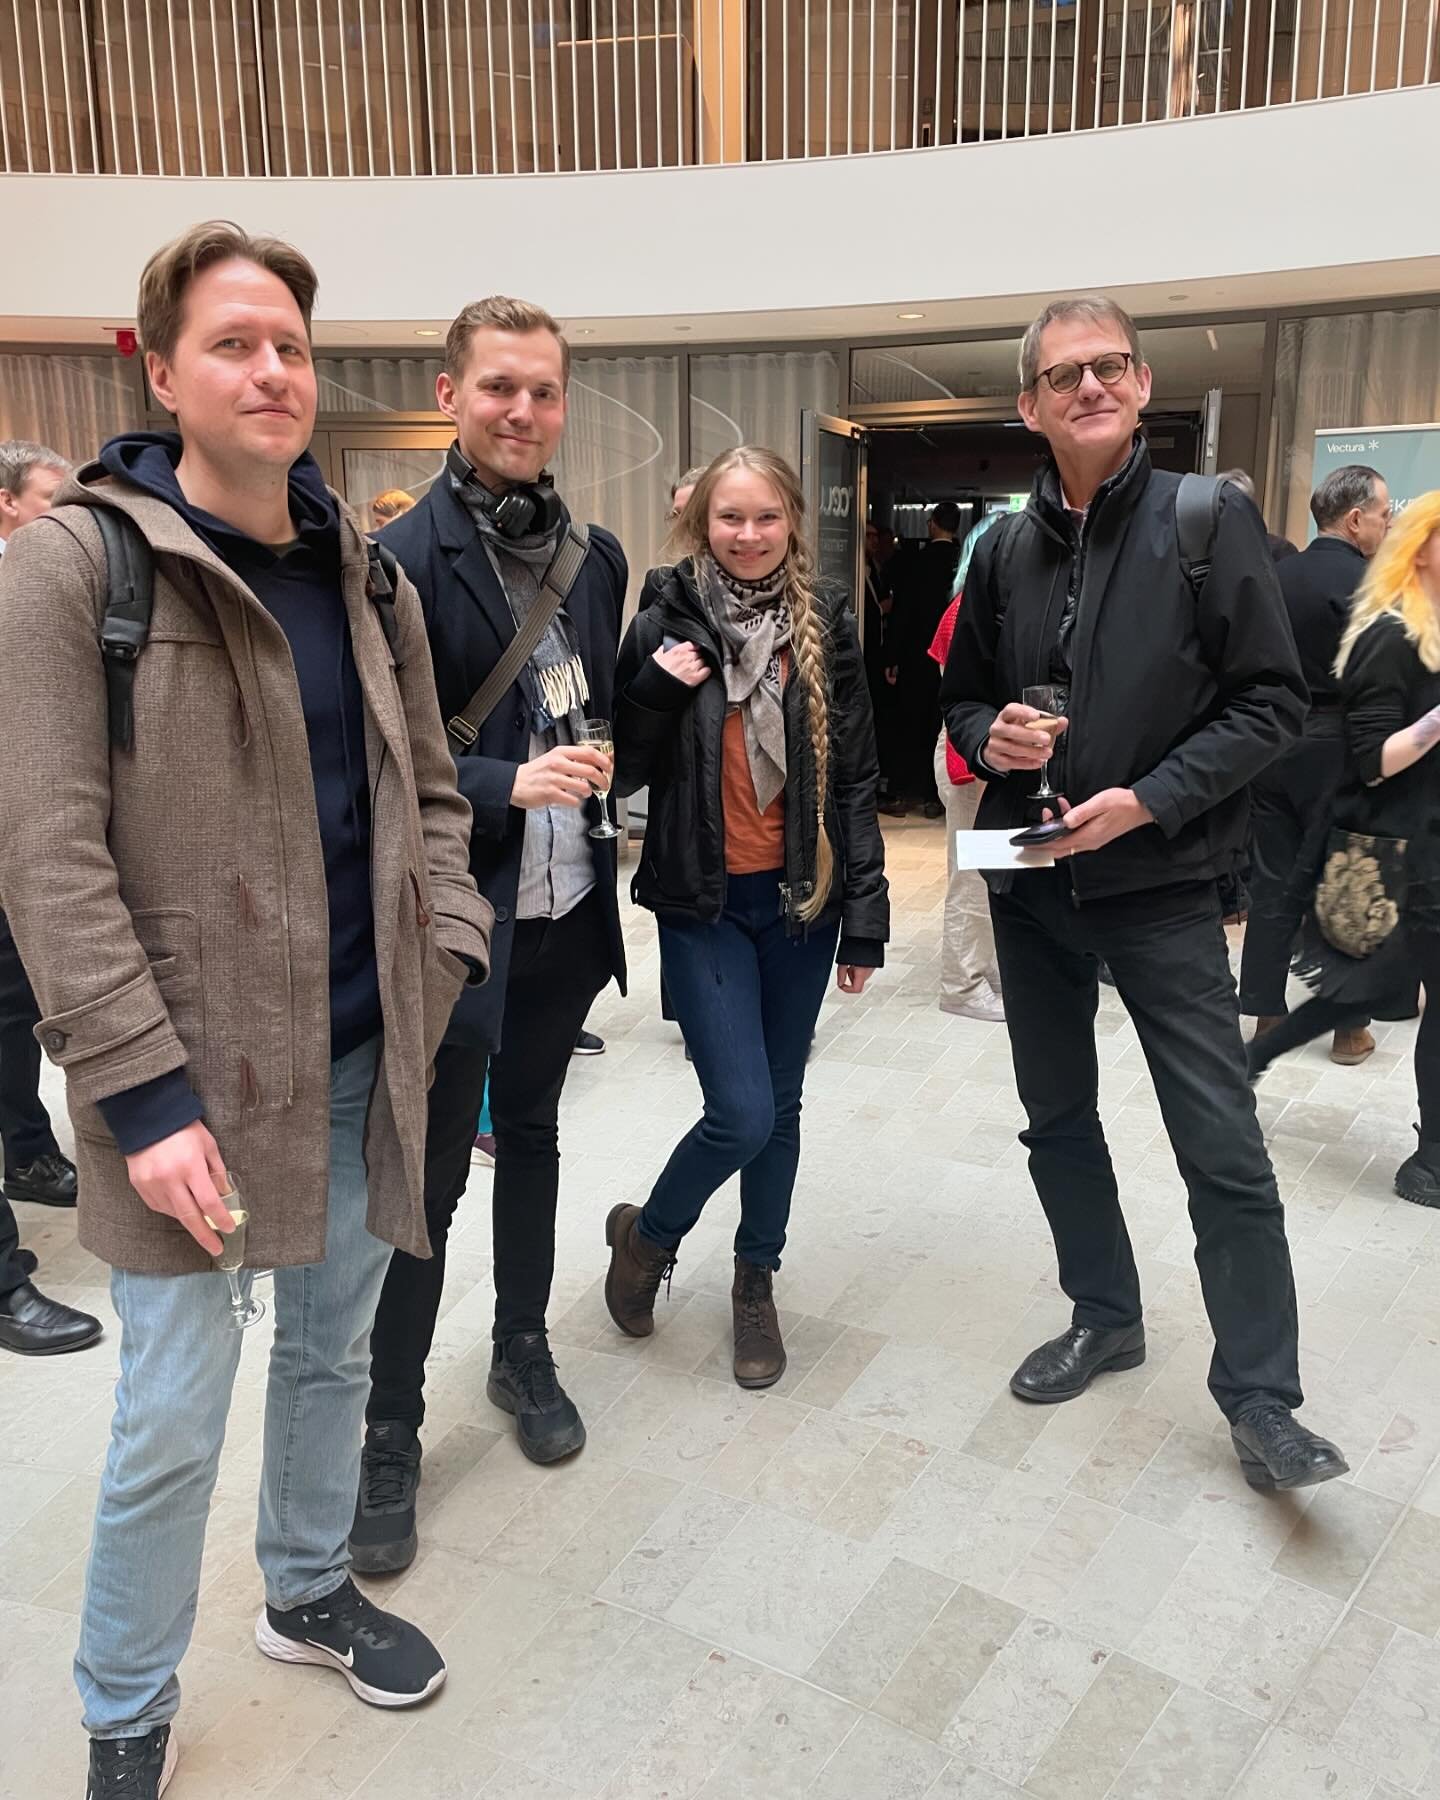 @kipainandbrain represented by Viktor Vadenmark, Sebastian Blom&eacute; and Julie Klinke with professor Martin Ingvar at the Grand Opening of the Cell, an artsy collaboration between the National Museum of Science and Technology @tekniskamuseet and @